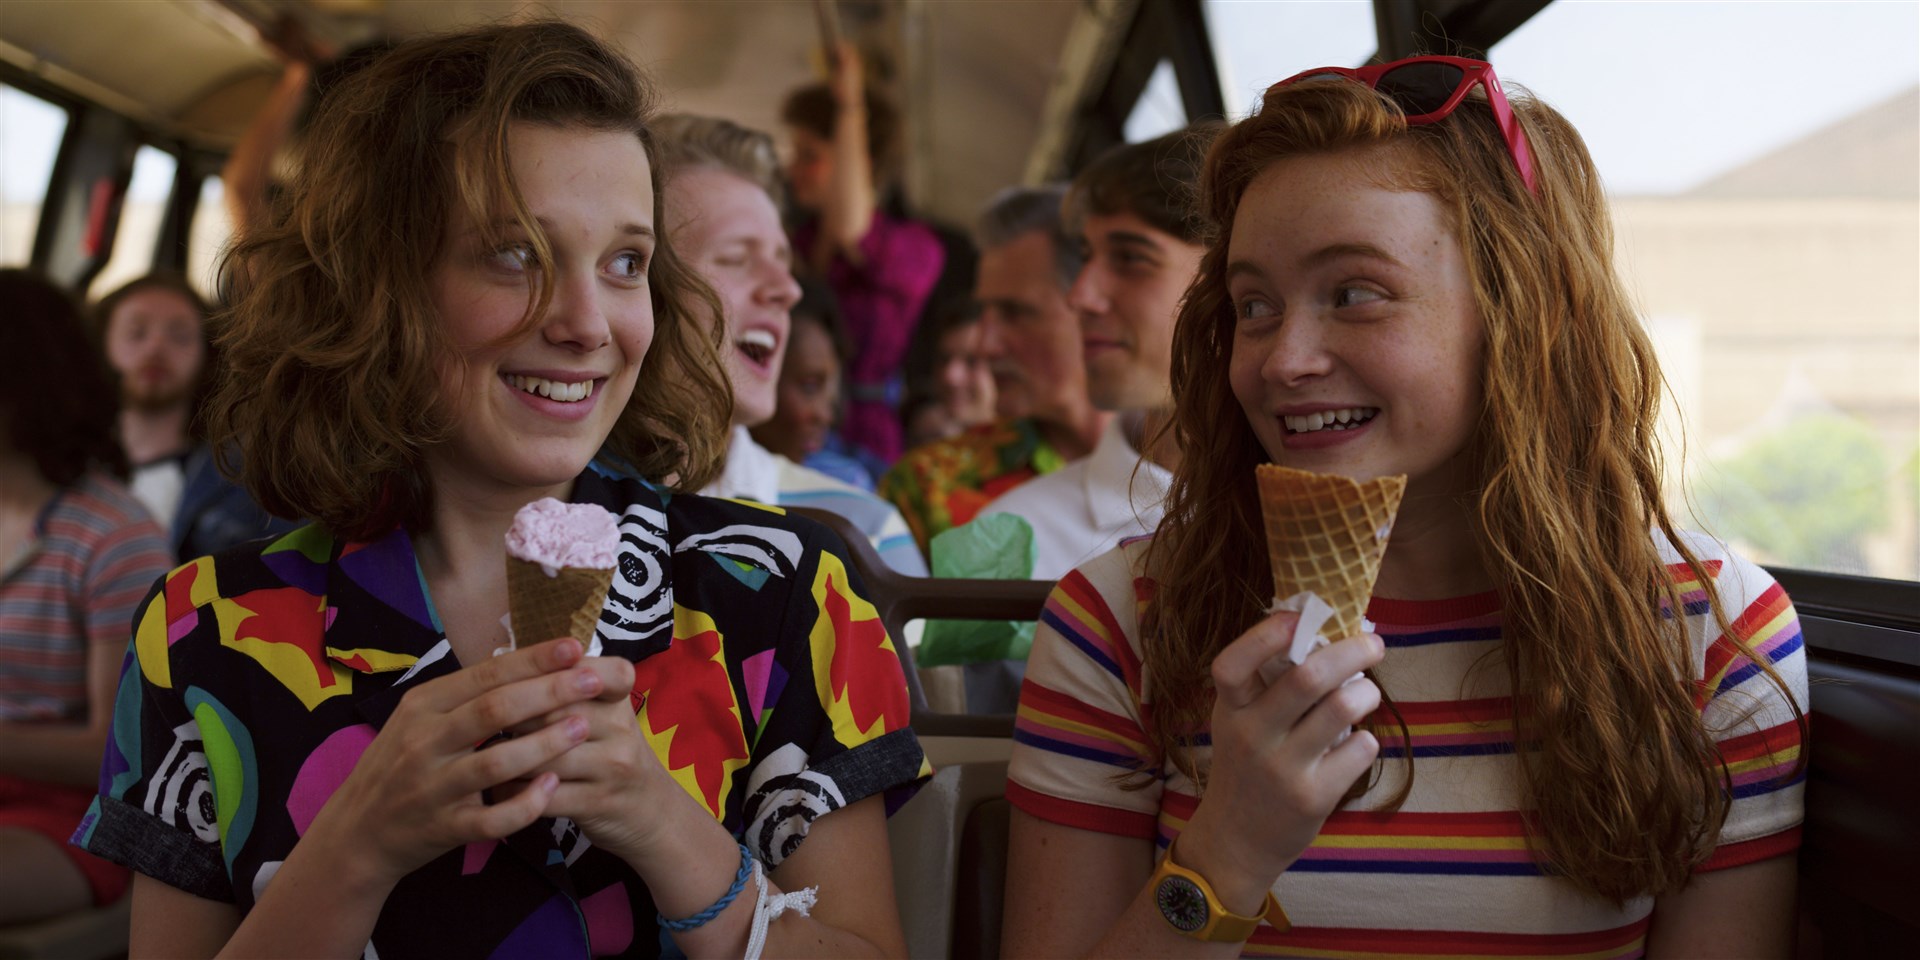 Sadie Sink, who plays Max in Stranger Things, with co-star Millie Bobby Brown (Netflix/PA)